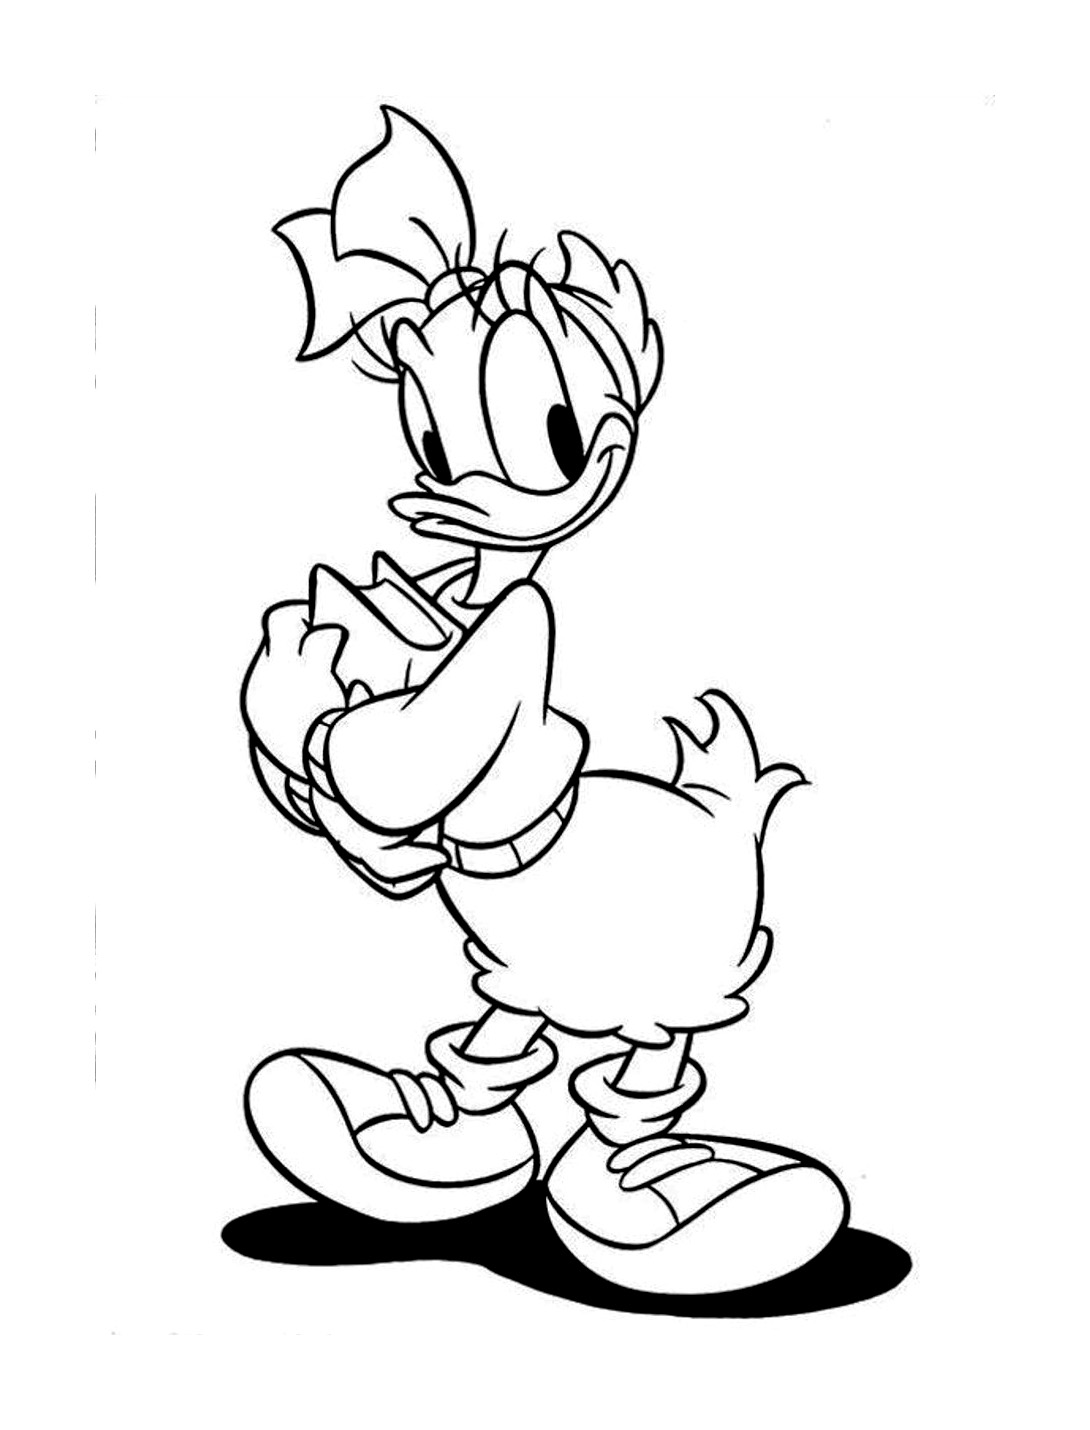 Image Daisy Duck to print and color